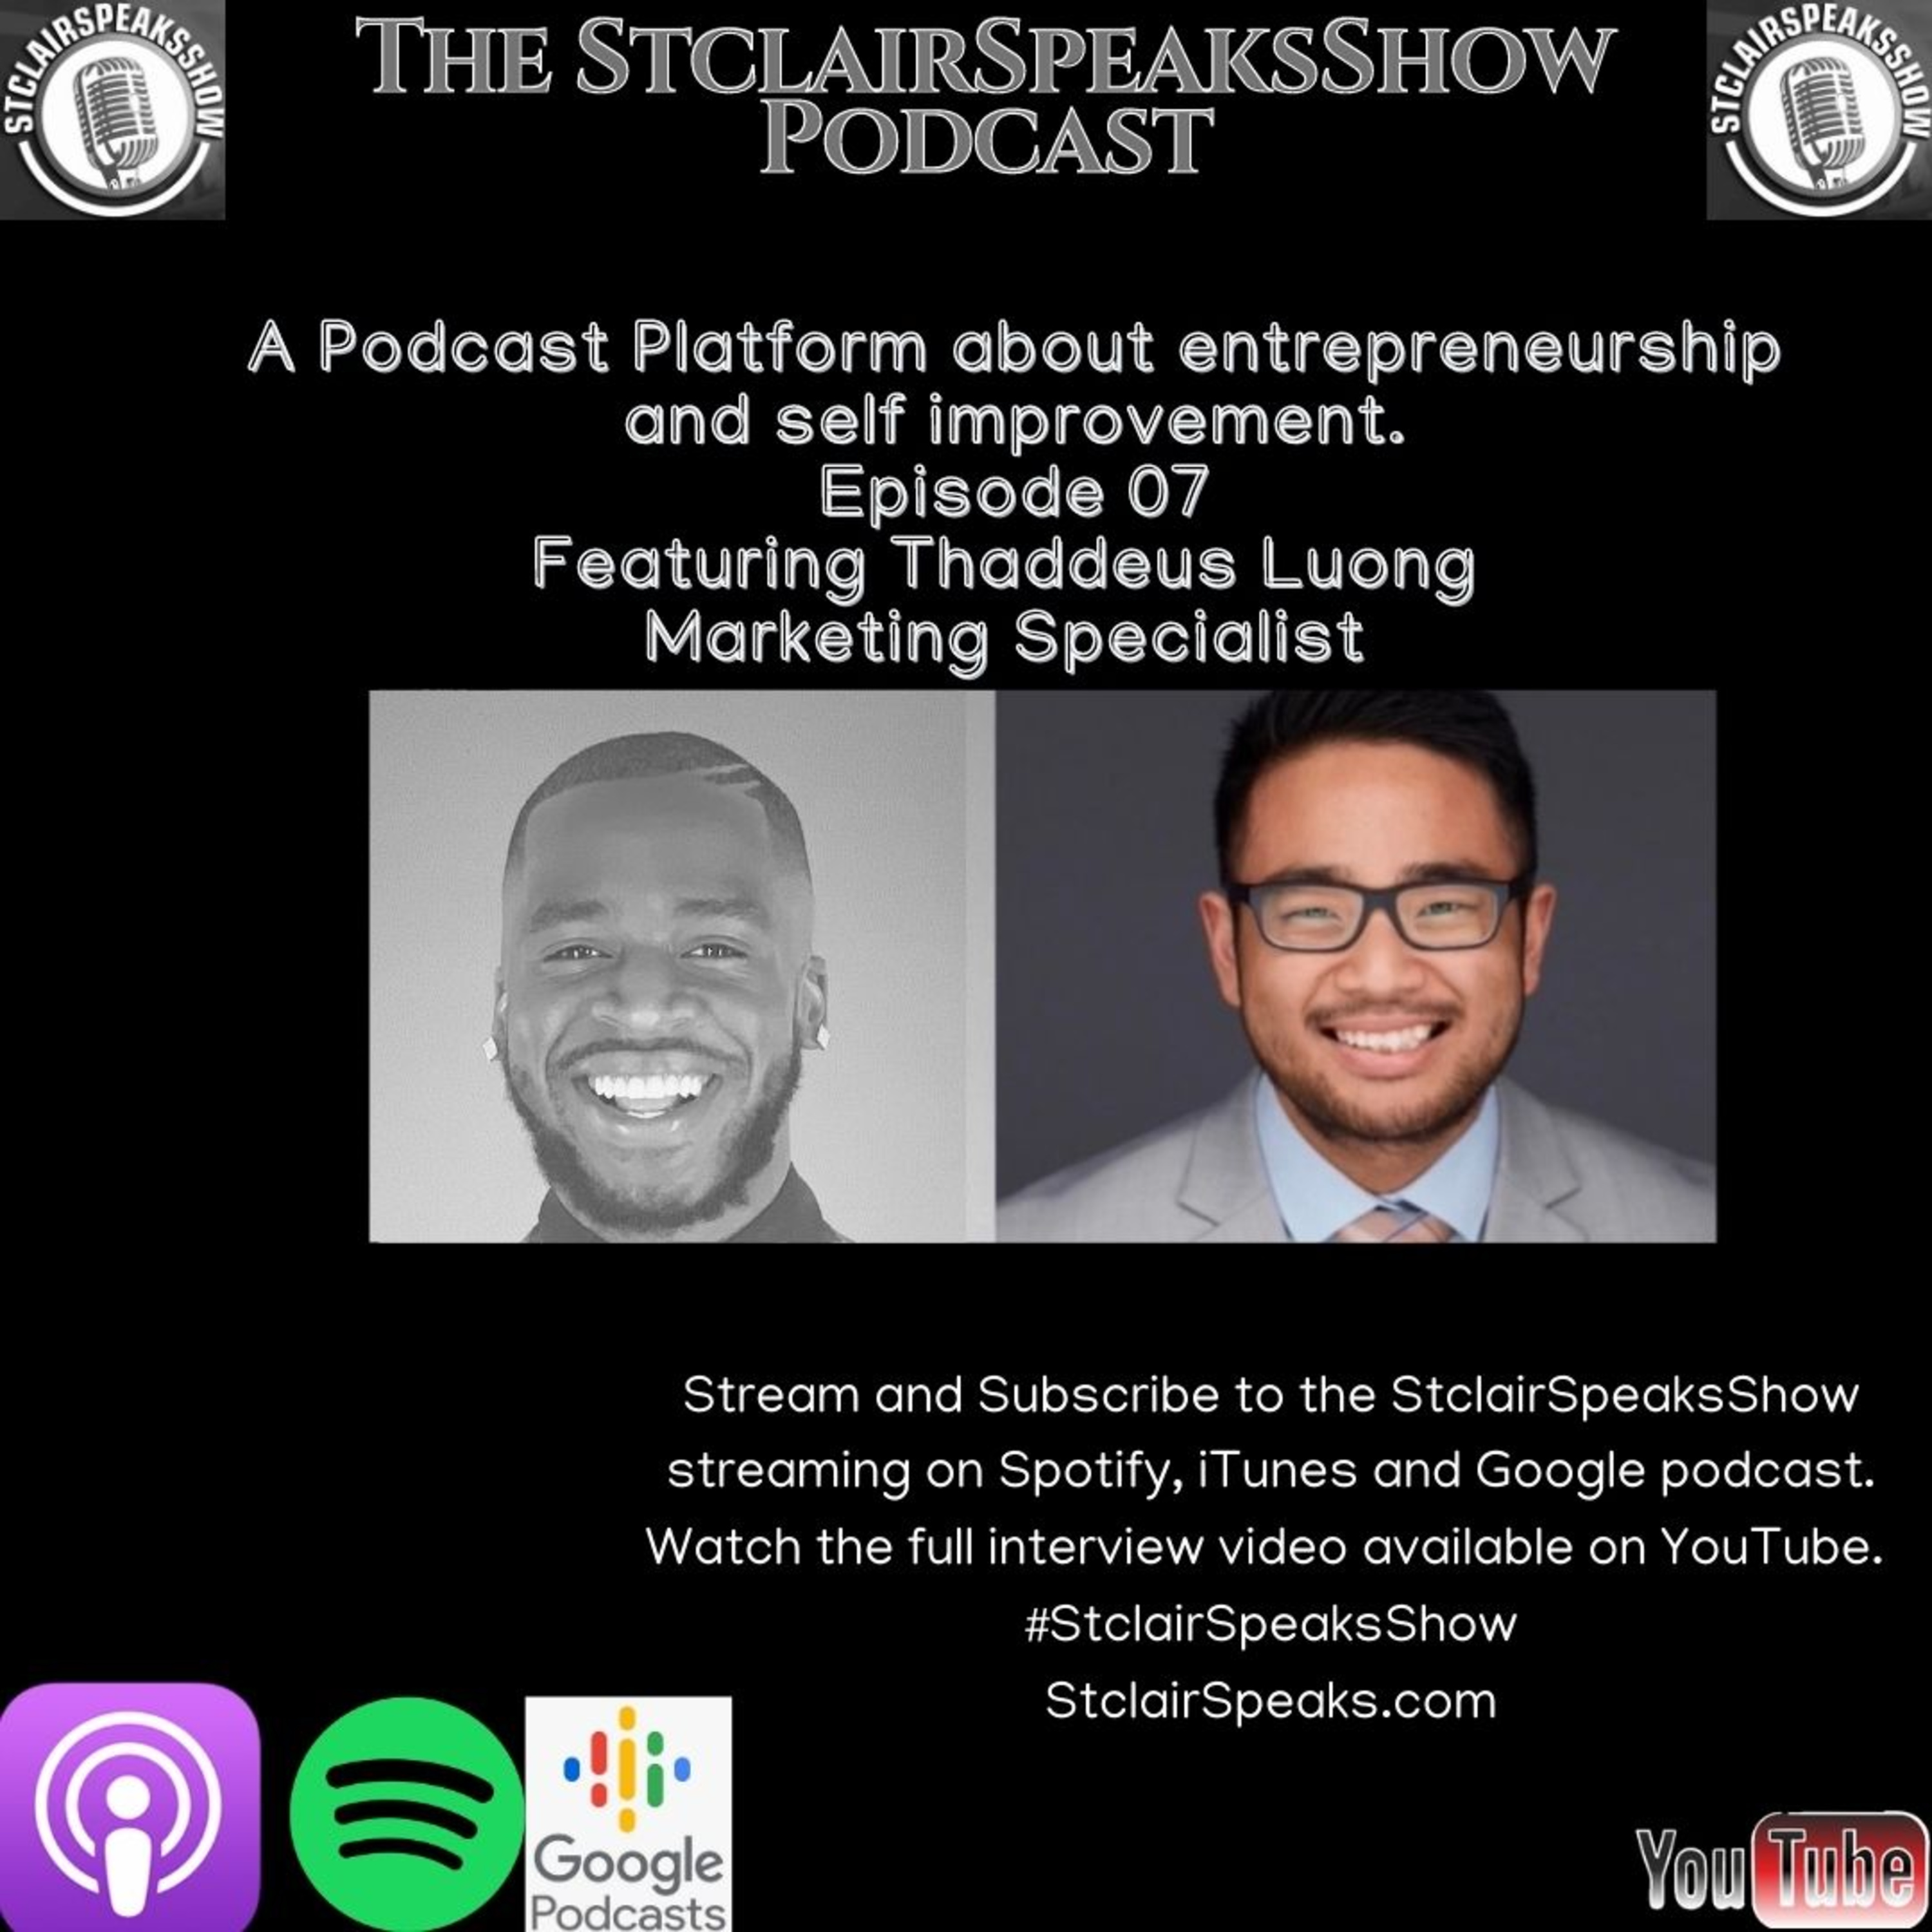 The StClairSpeaks Show Episode 07 Featuring Thaddeus Luong Marketing Specialist. Image